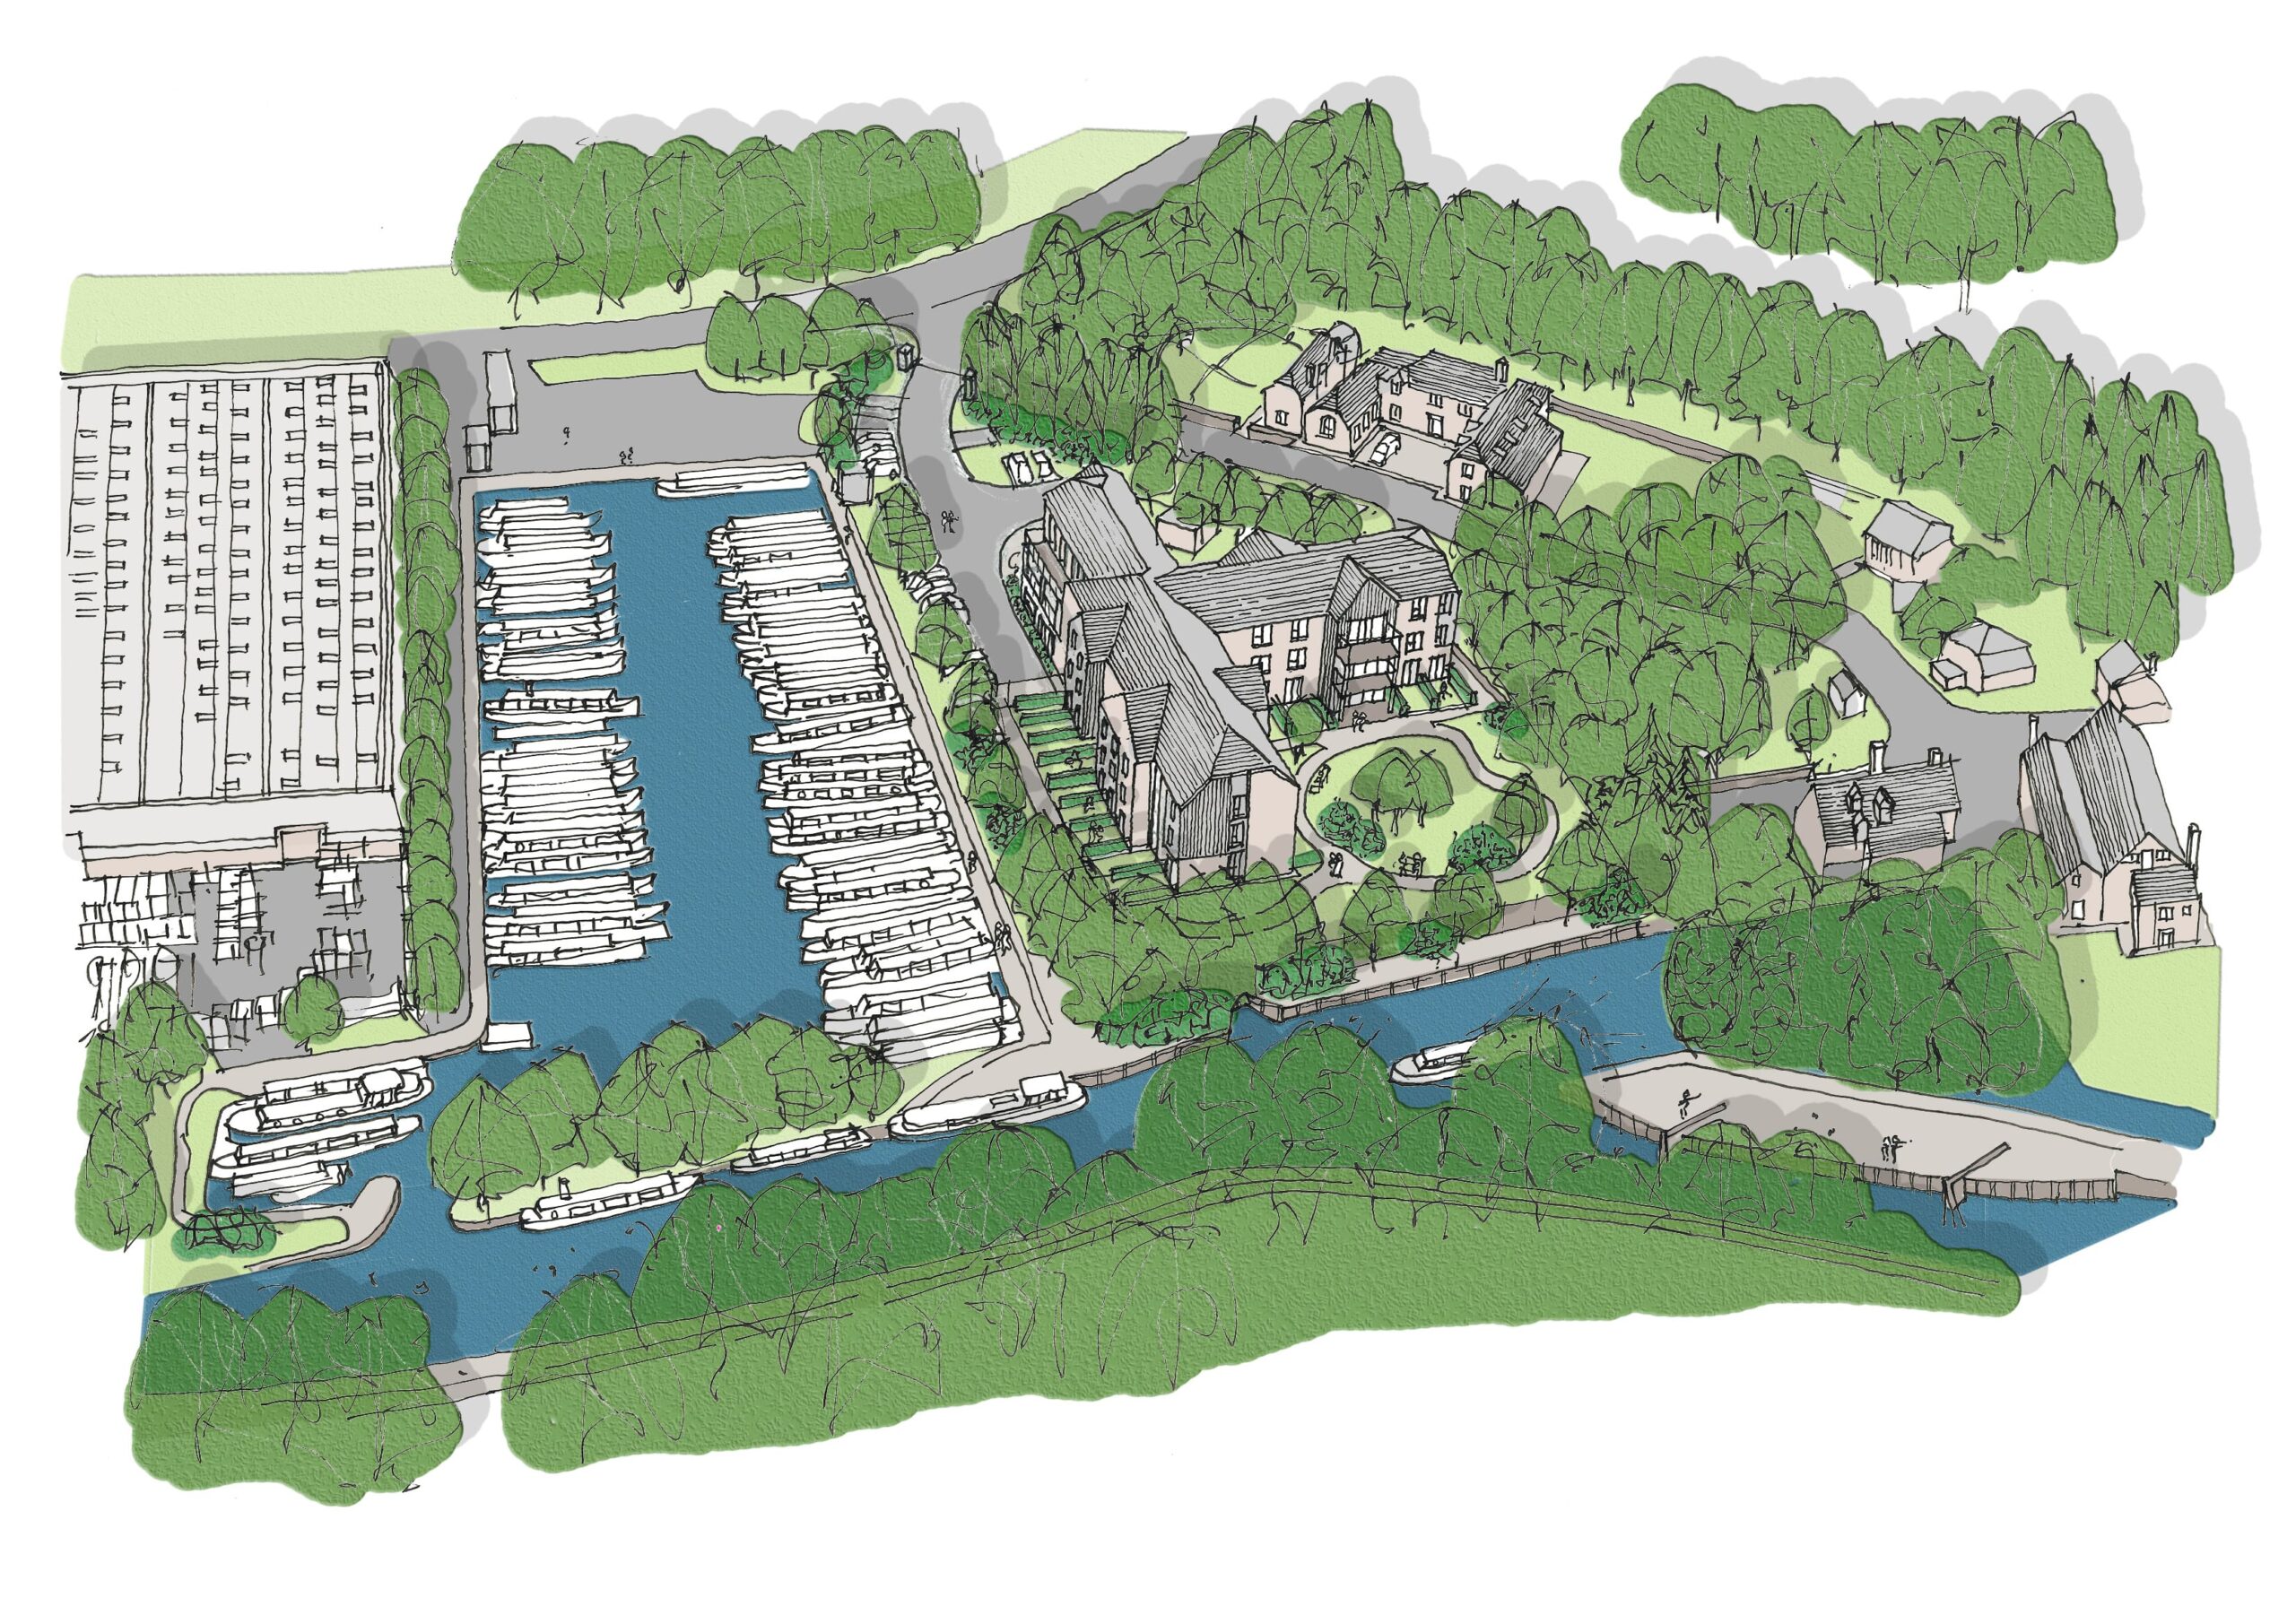 Proposed Indicative Care Home Plan in Newbury